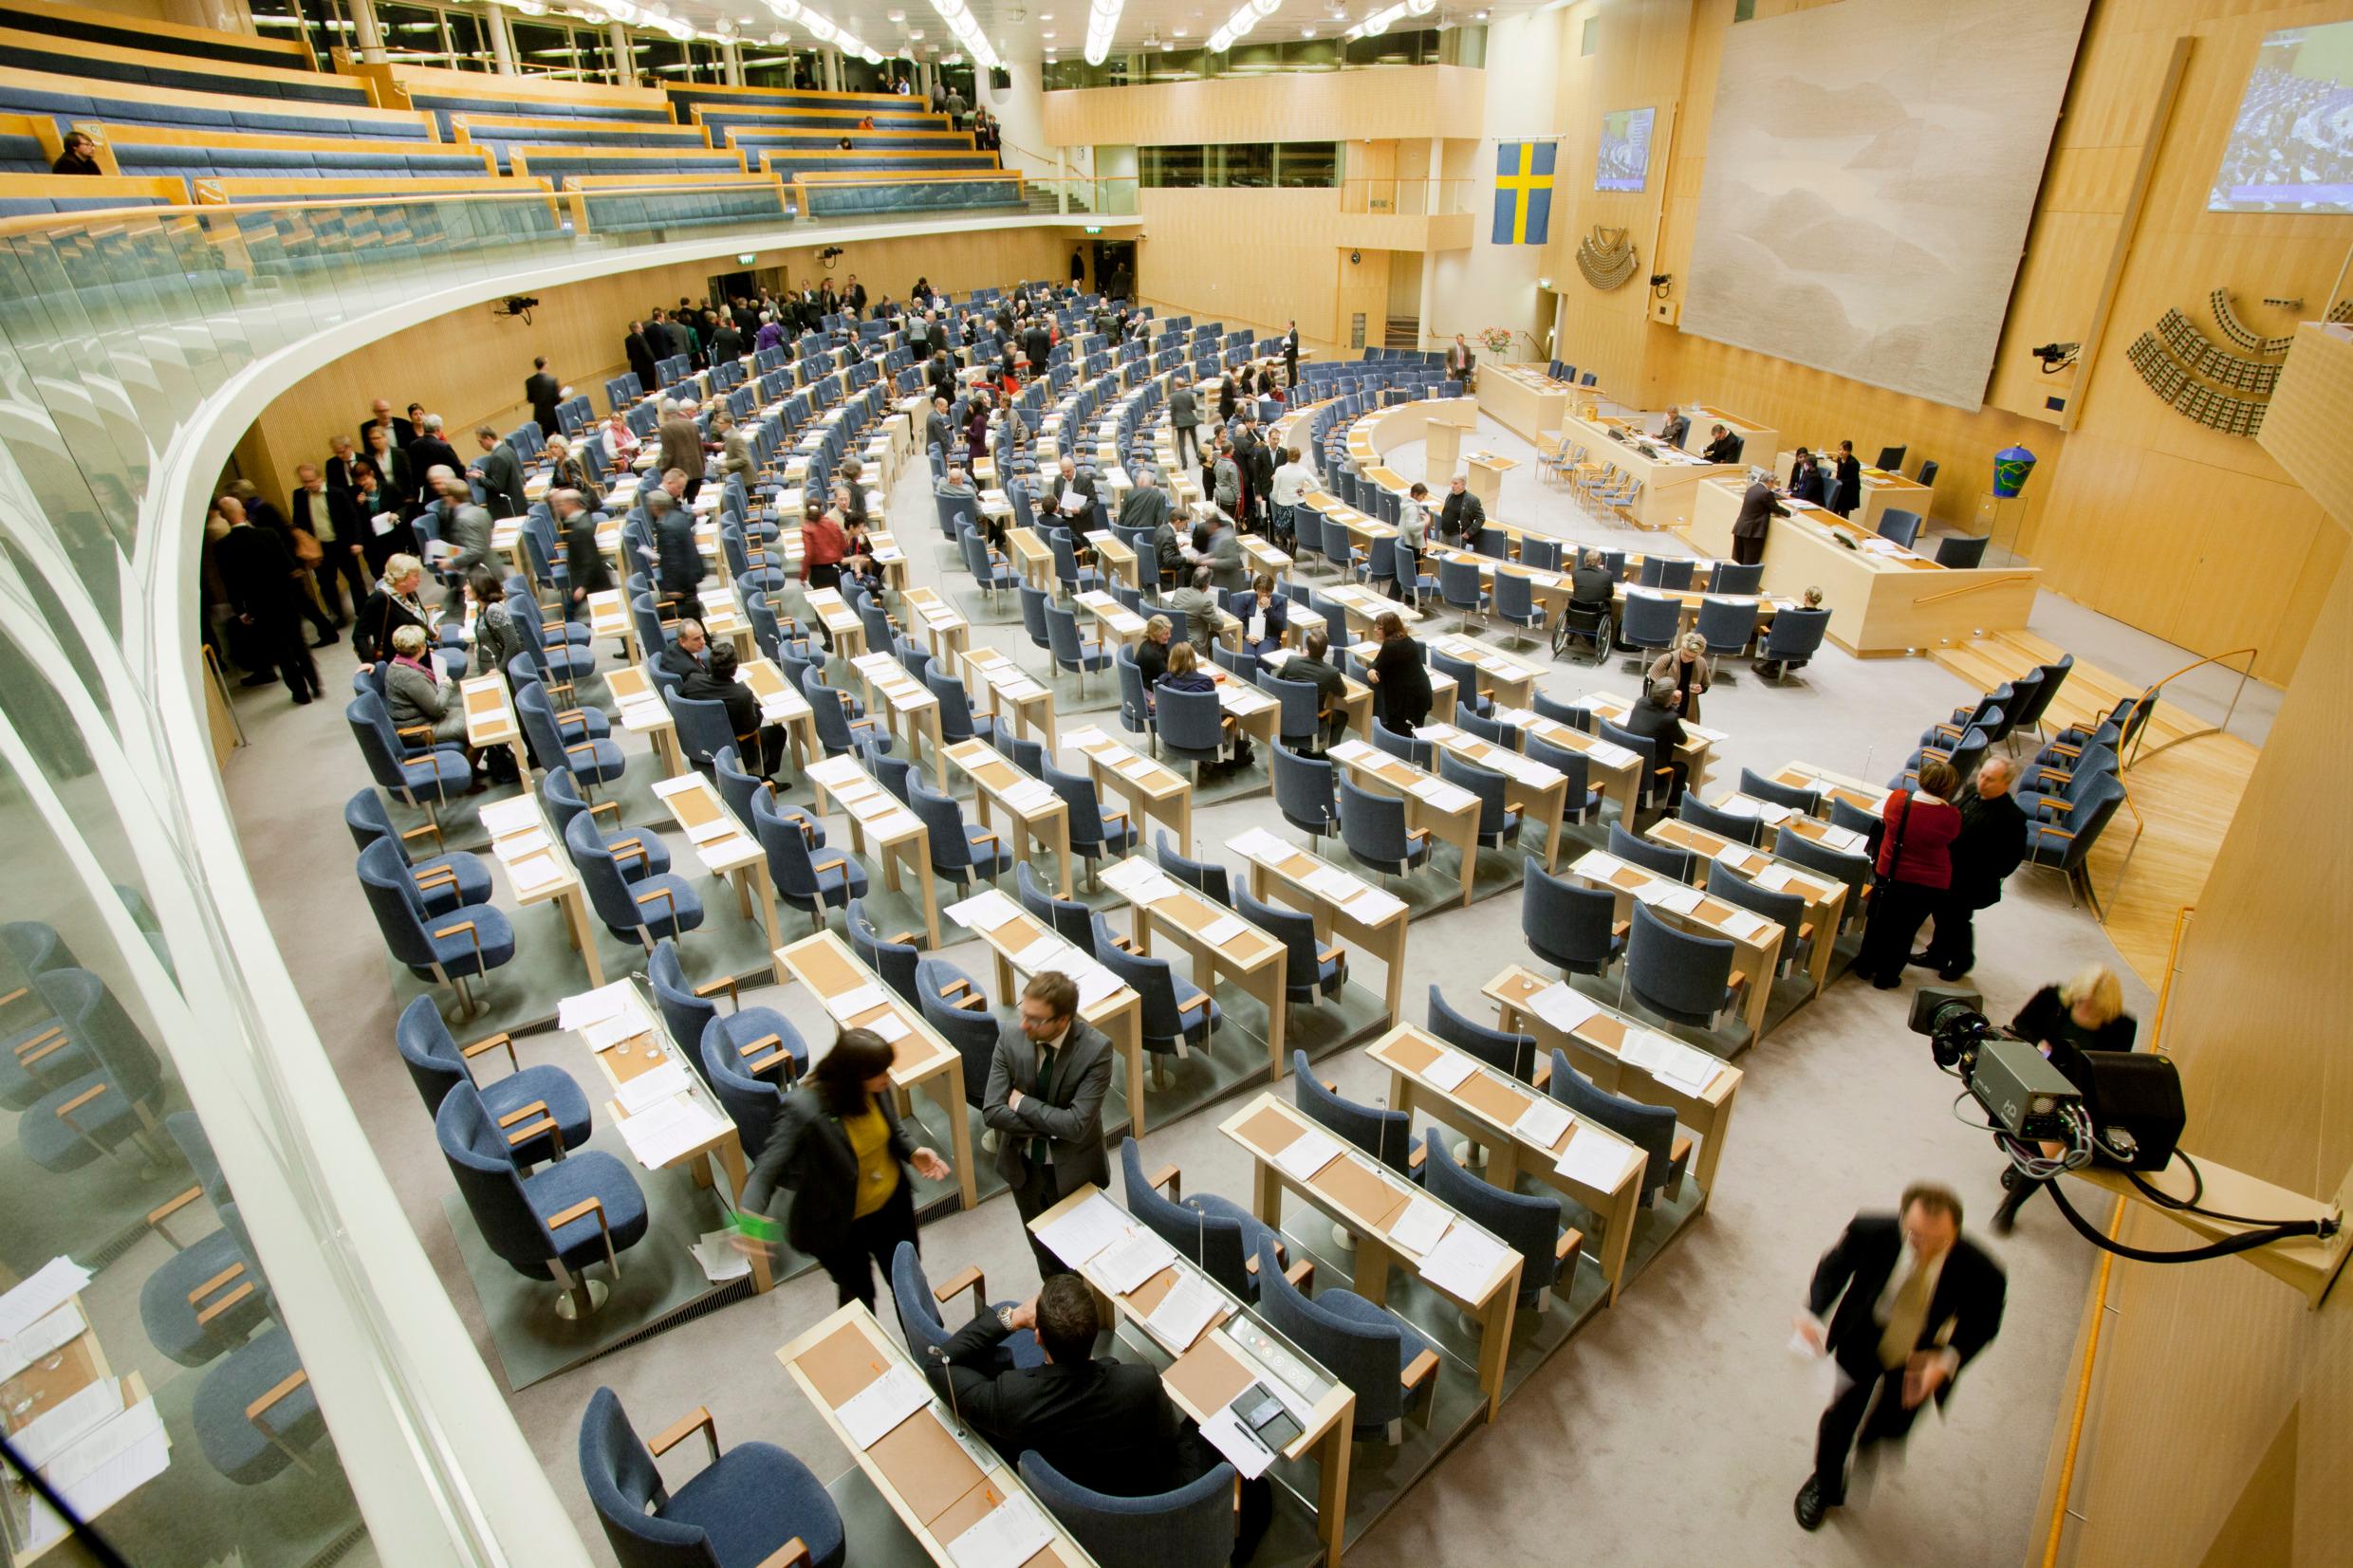 The chamber of the Swedish parliament, with desks and seats seen from the side.